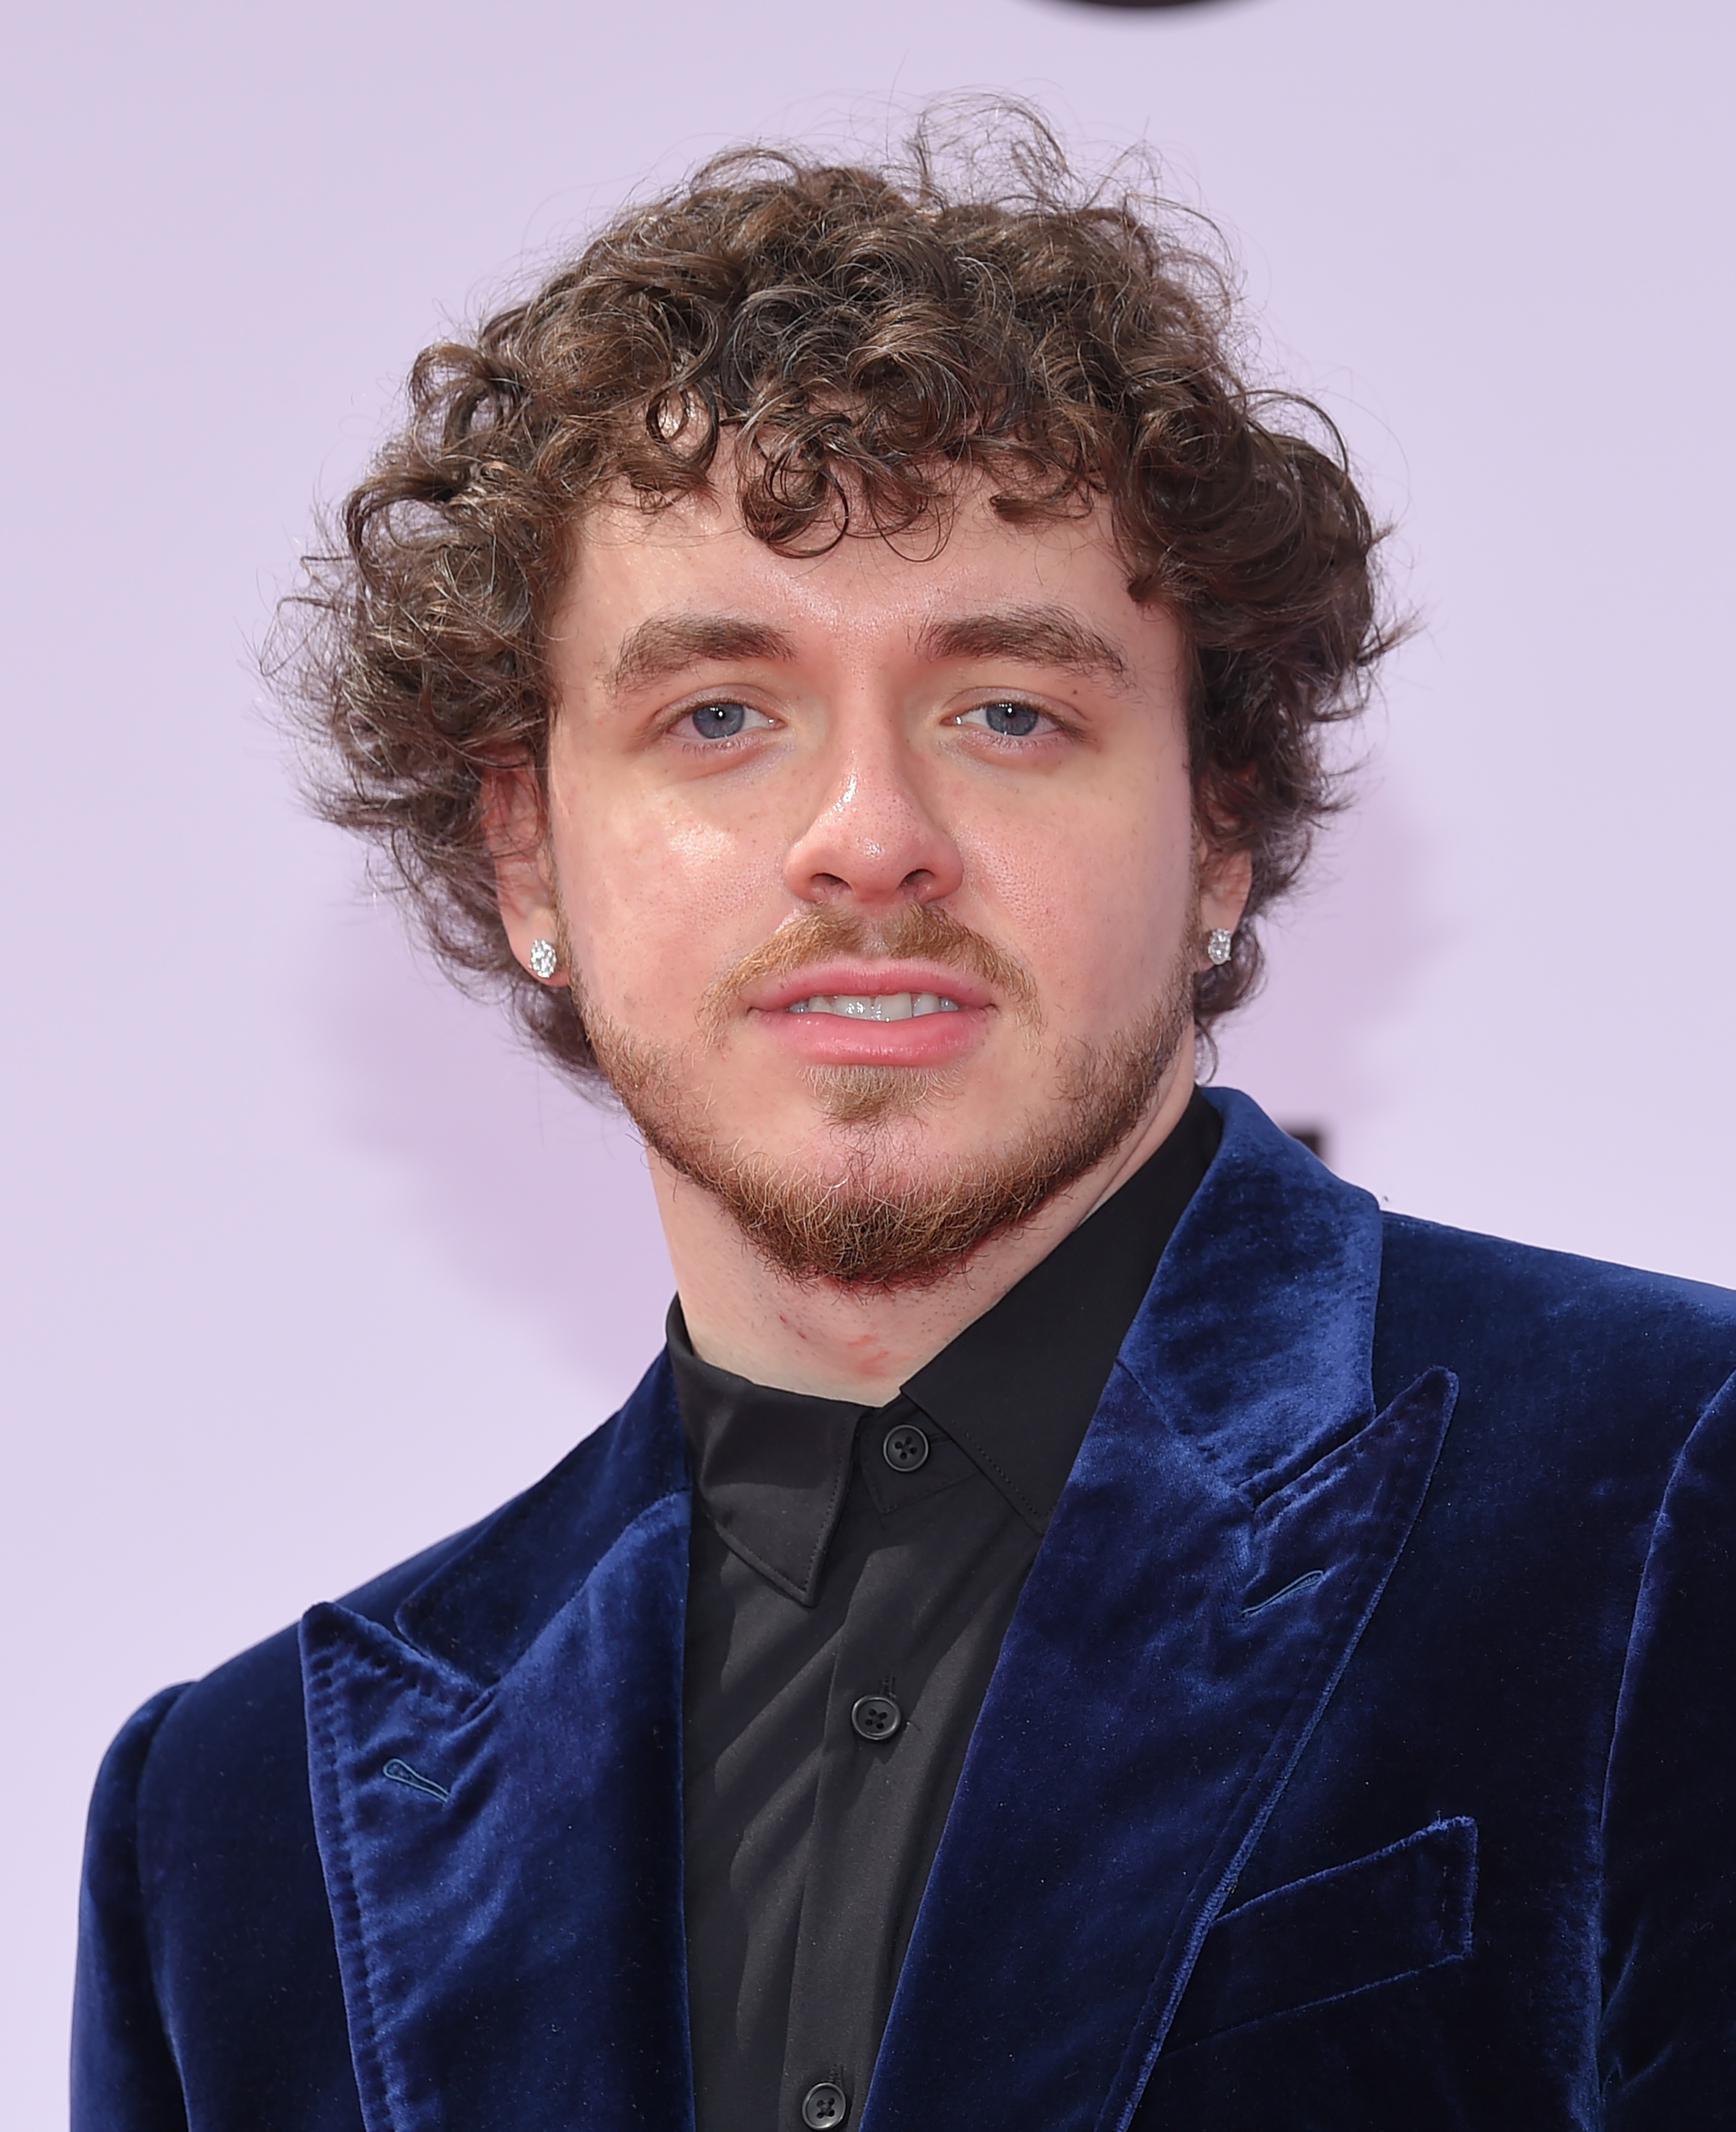 Jack Harlow Net Worth How Much Money the Rapper Has